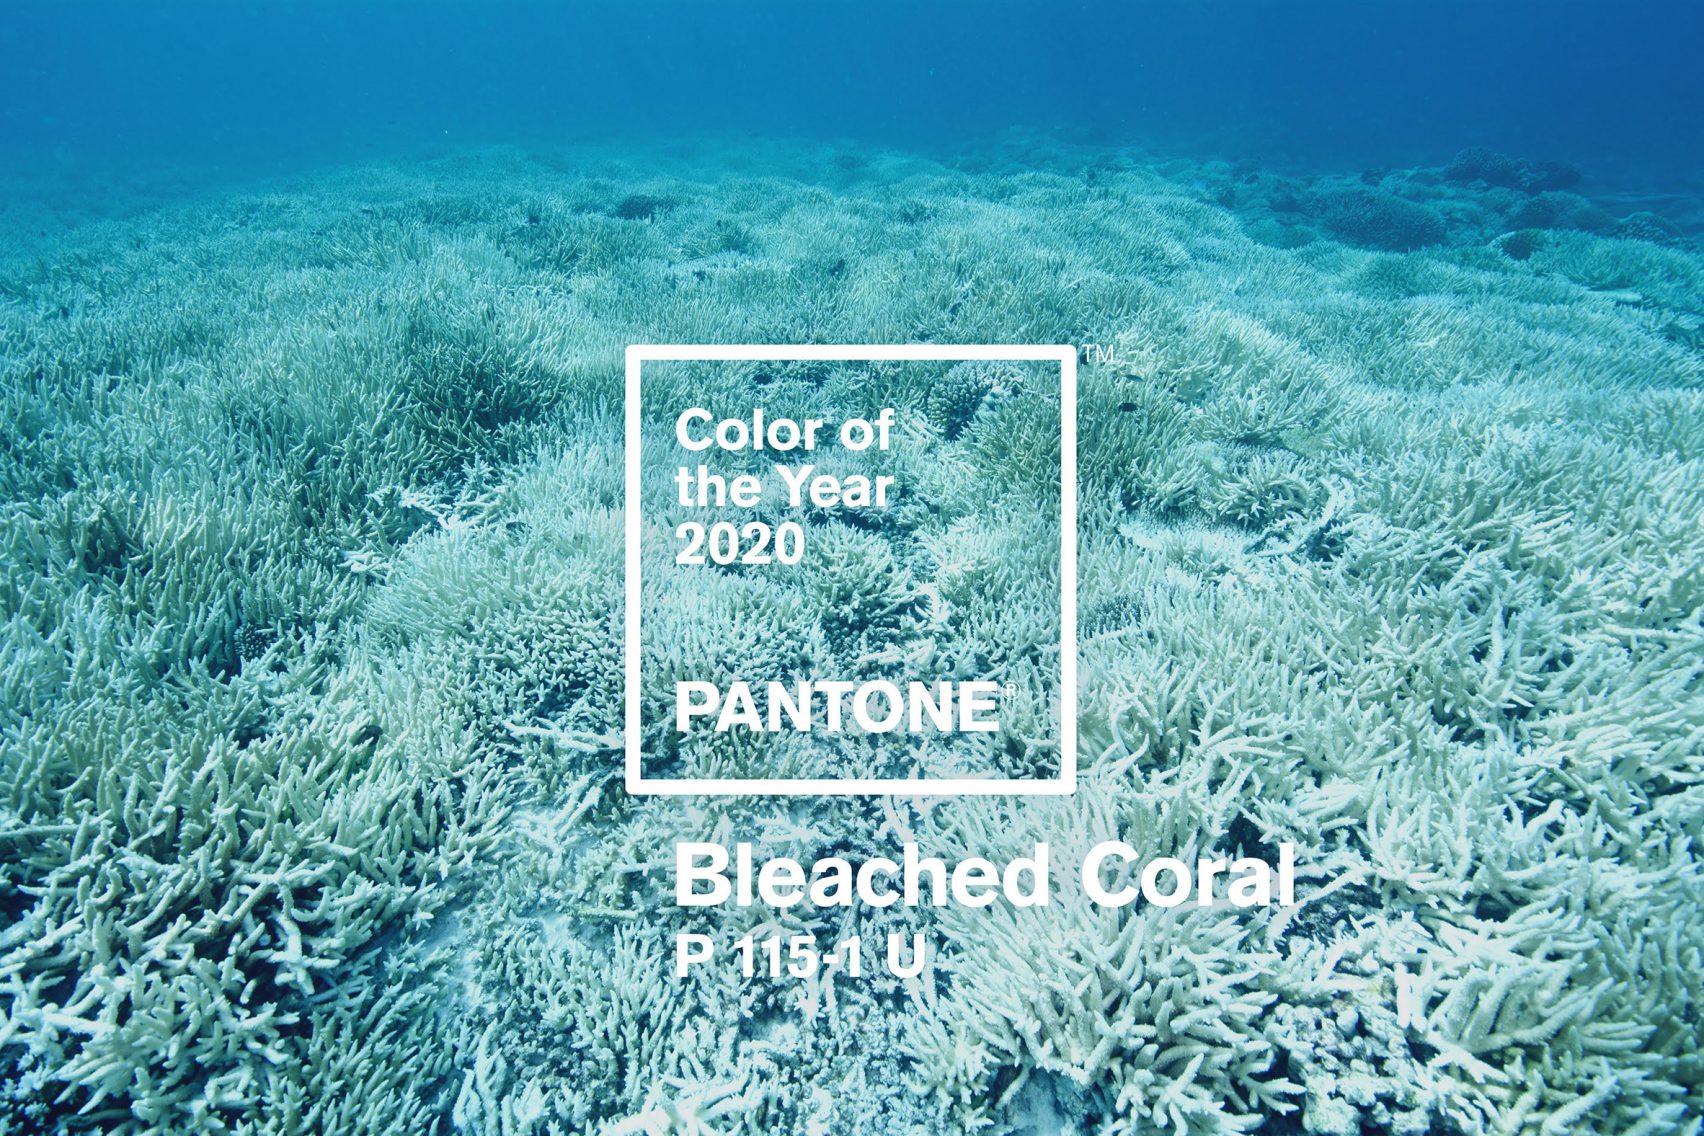 Bleached Coral for color of the year 2020